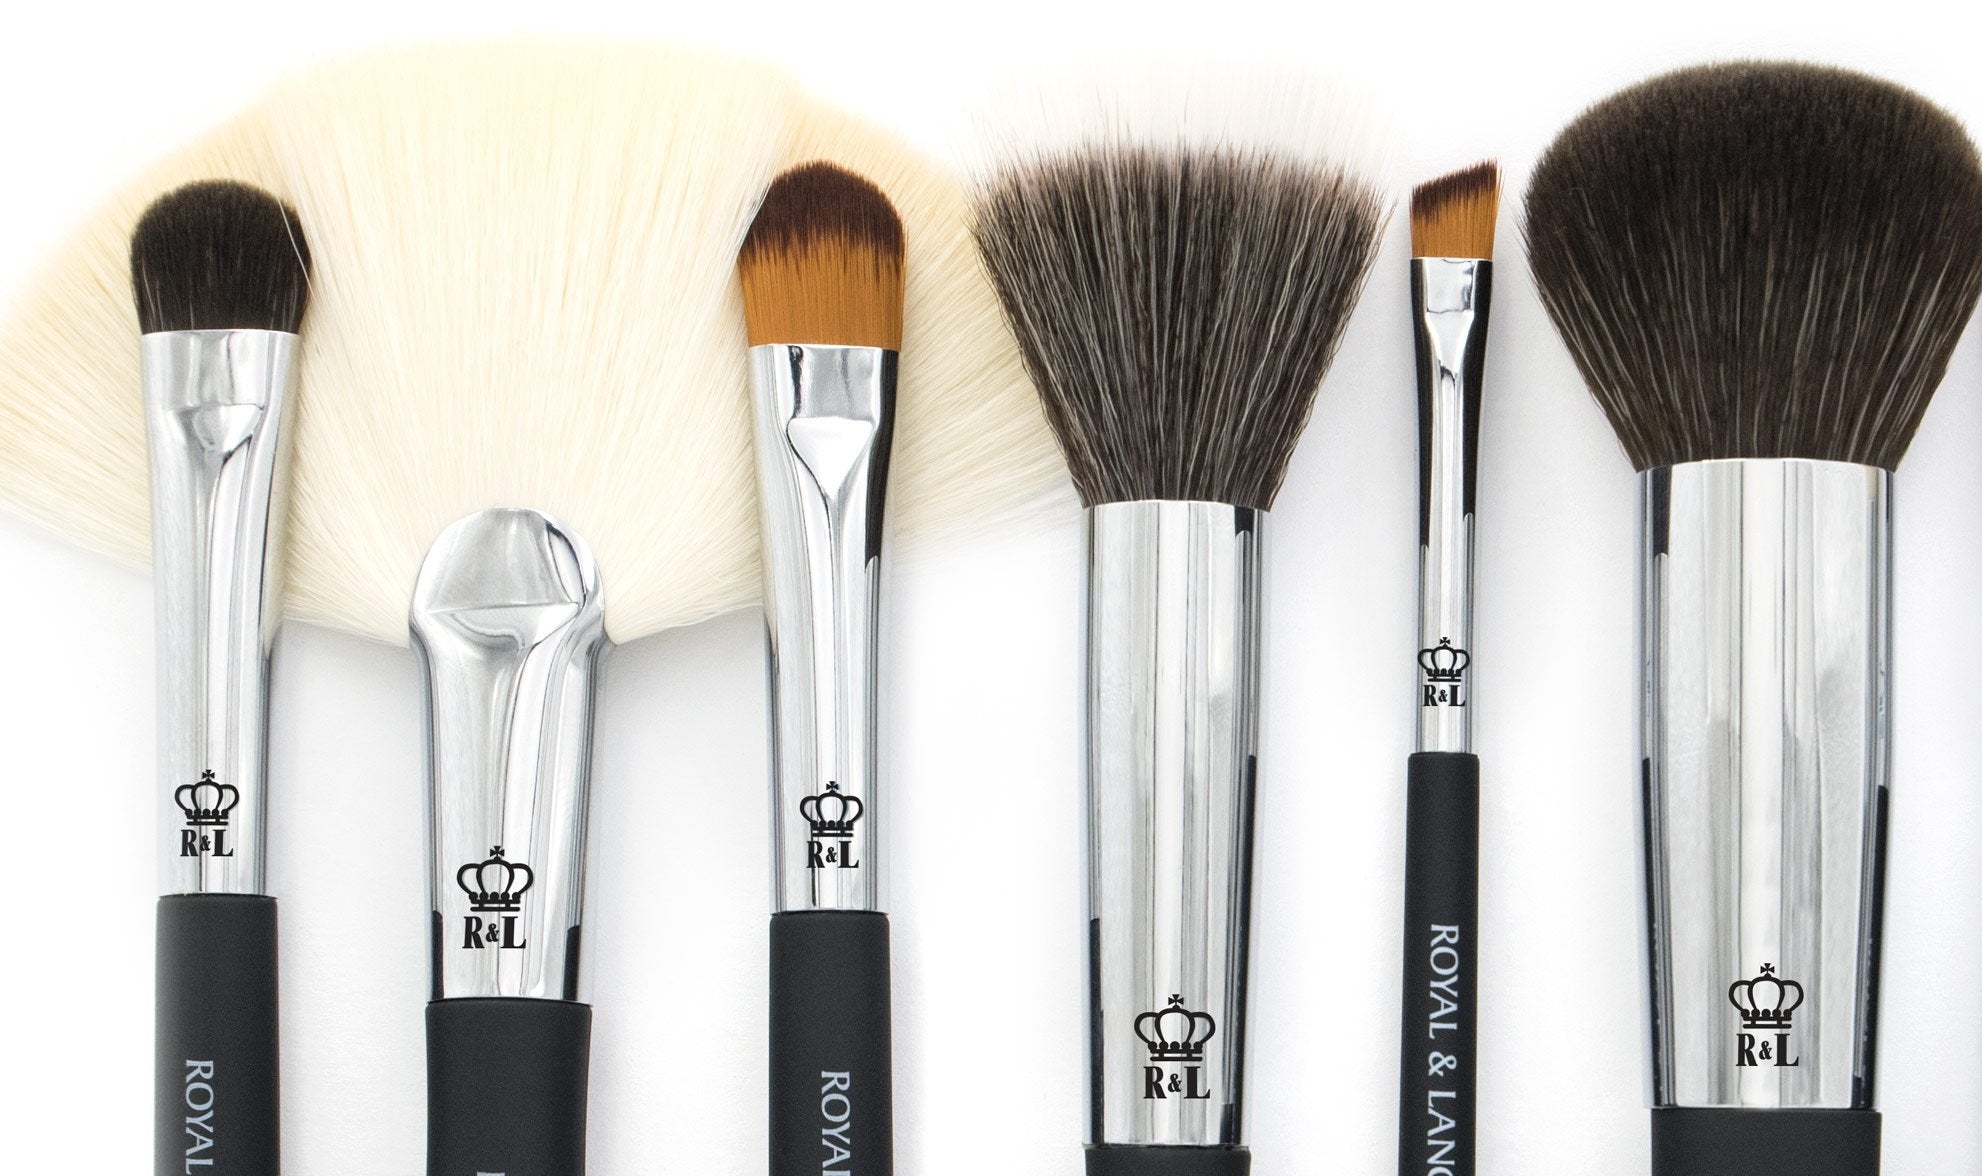 Royalty Red Pro Member Program featuring OMNIA Professional Brushes